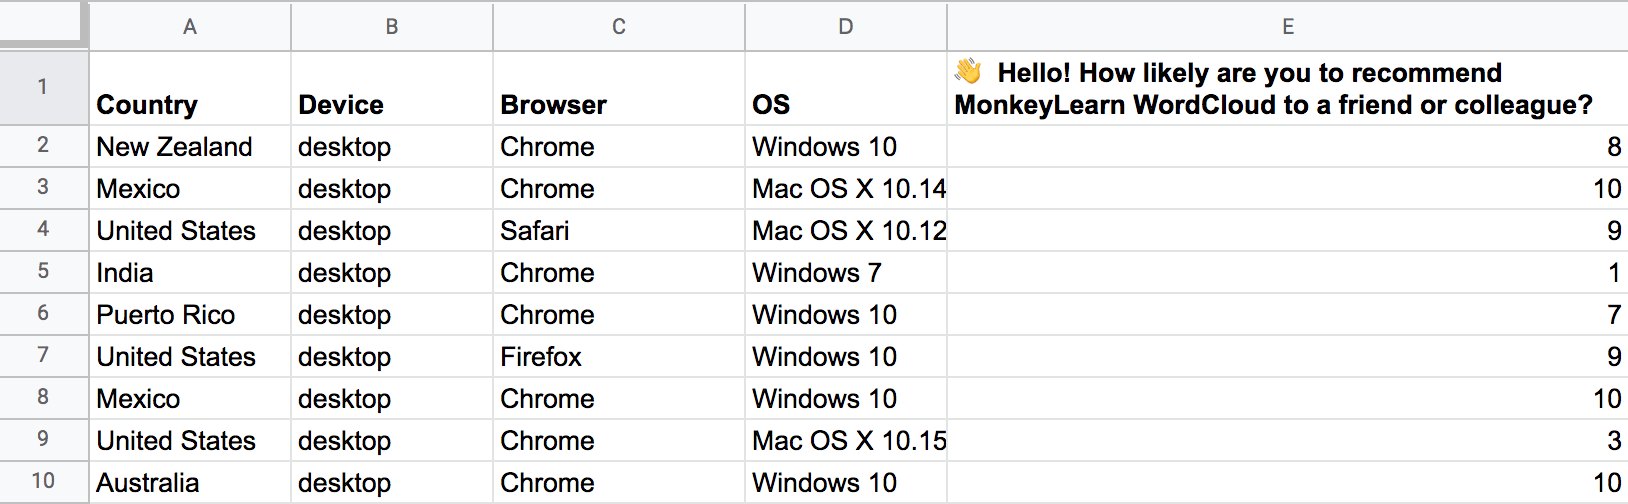 A spreadsheet showing NPS survey analysis results by Country, Device, Browser, and Operating System.